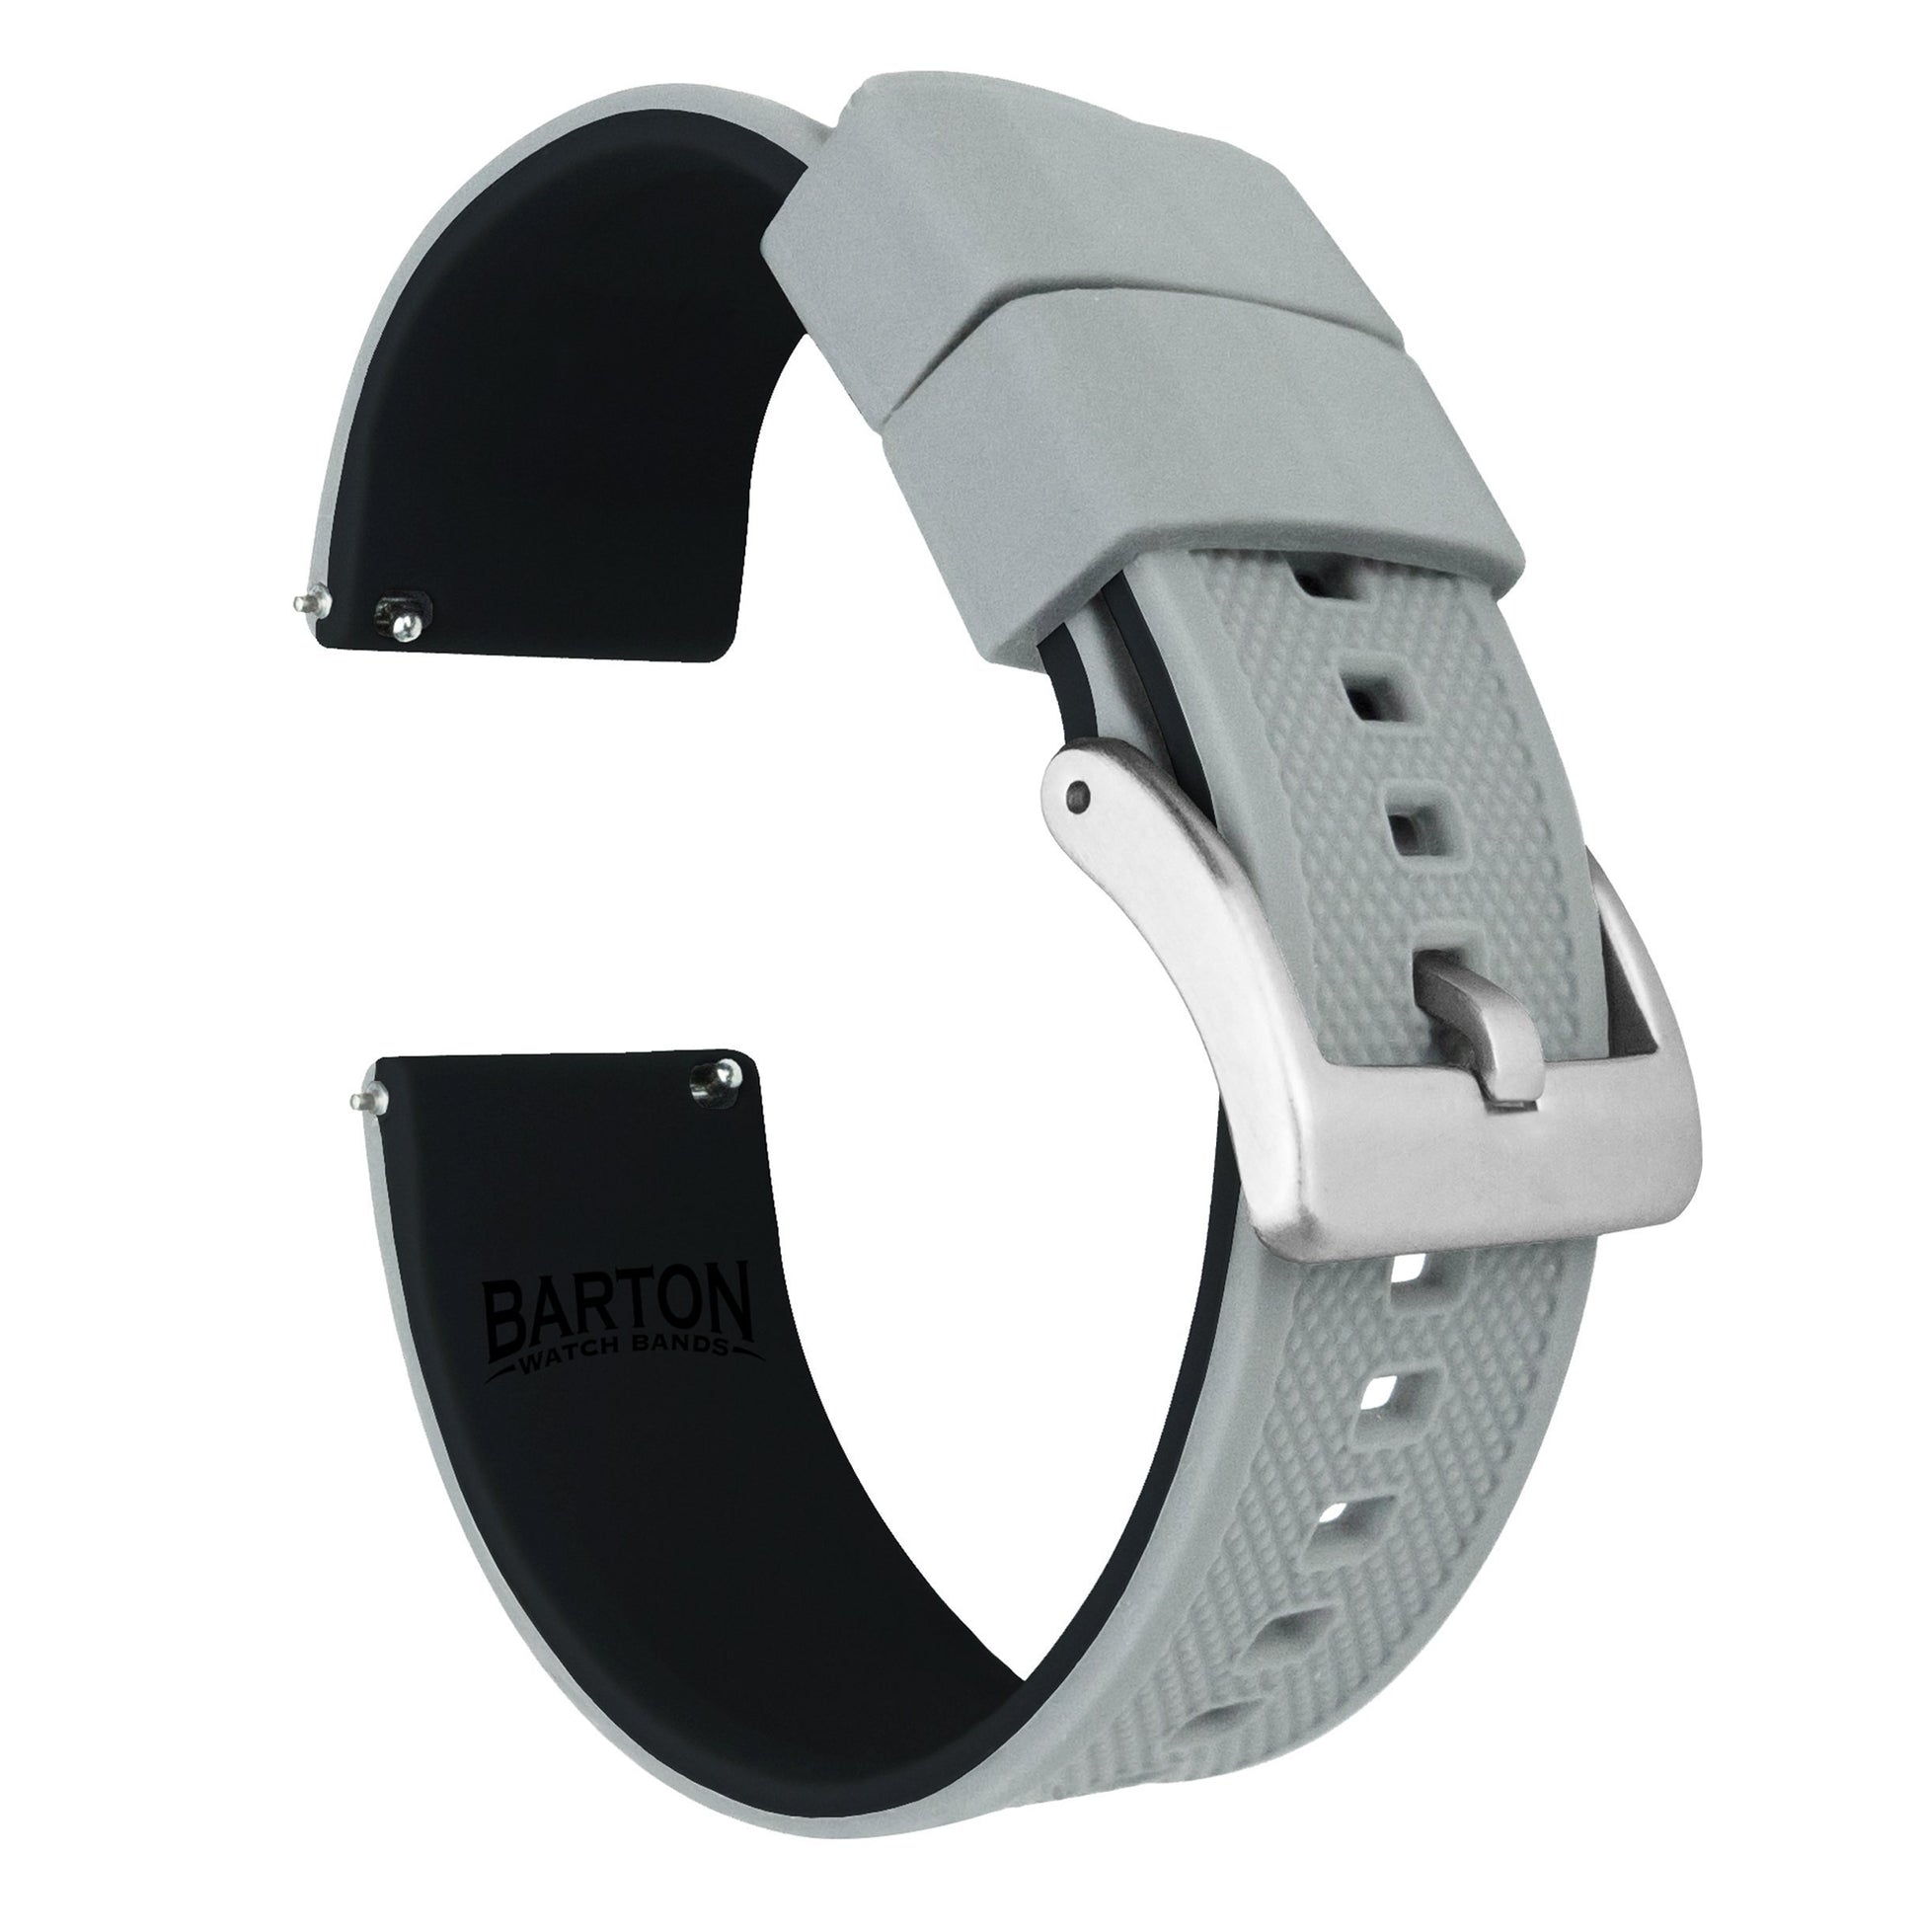 Pebble Smart Watches | Elite Silicone | Cool Grey Top / Black Bottom - Barton Watch Bands